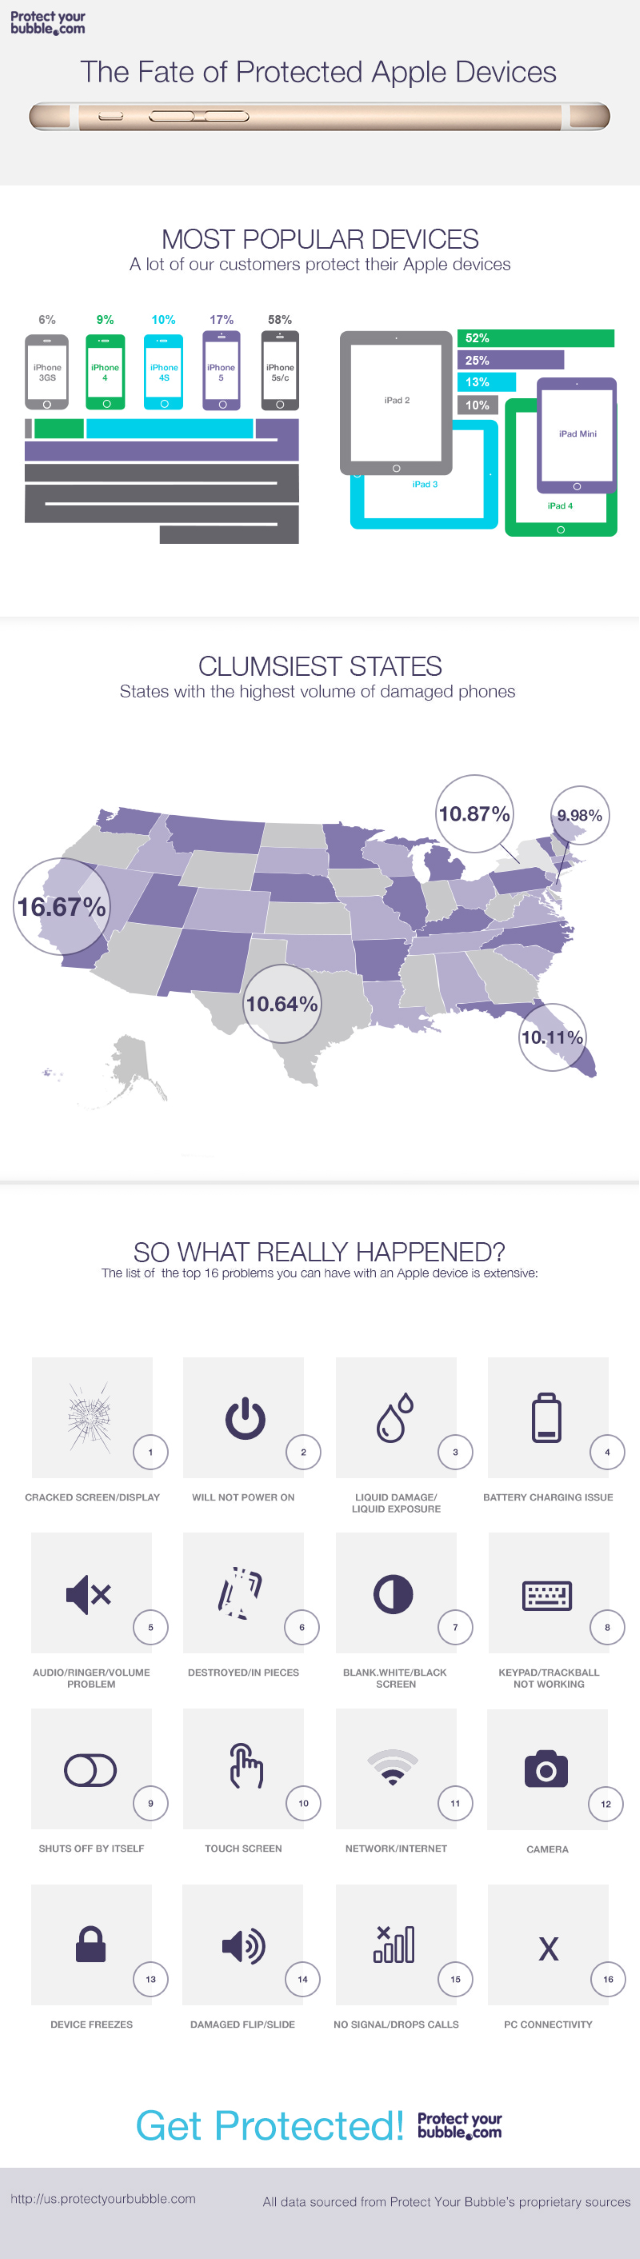 APPROVED_Apple 2014 infographic640